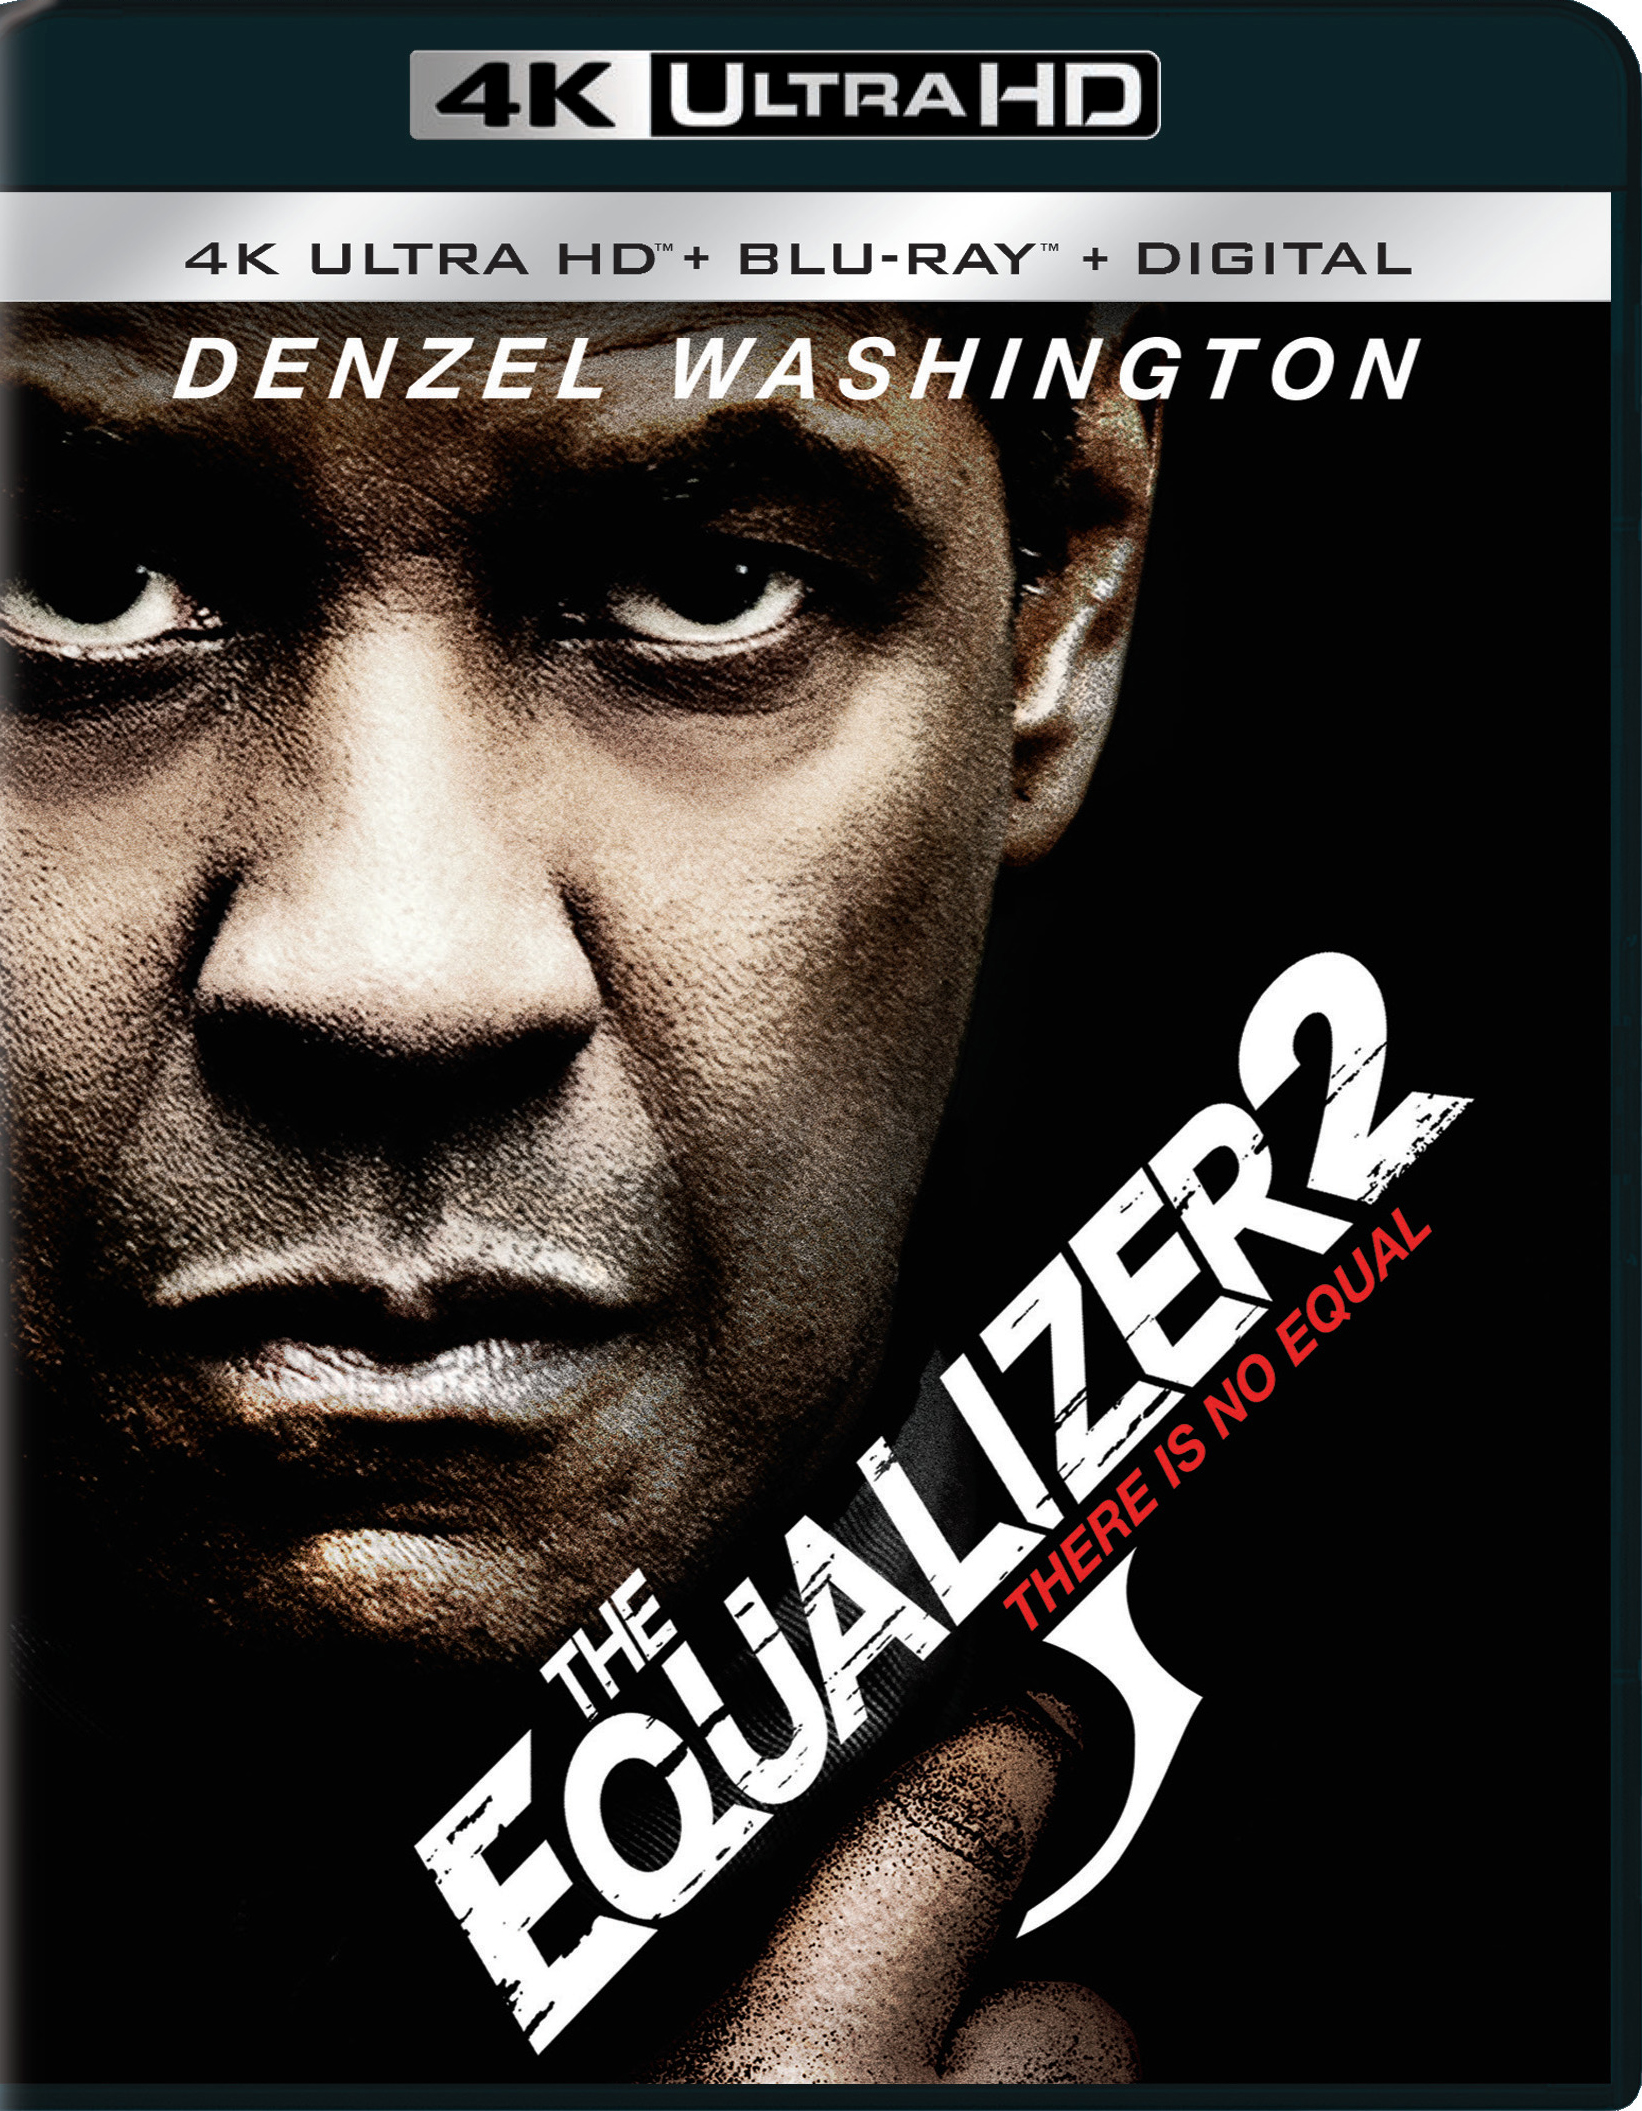 THE EQUALIZER 2 2018 (4K ULTRA HD)